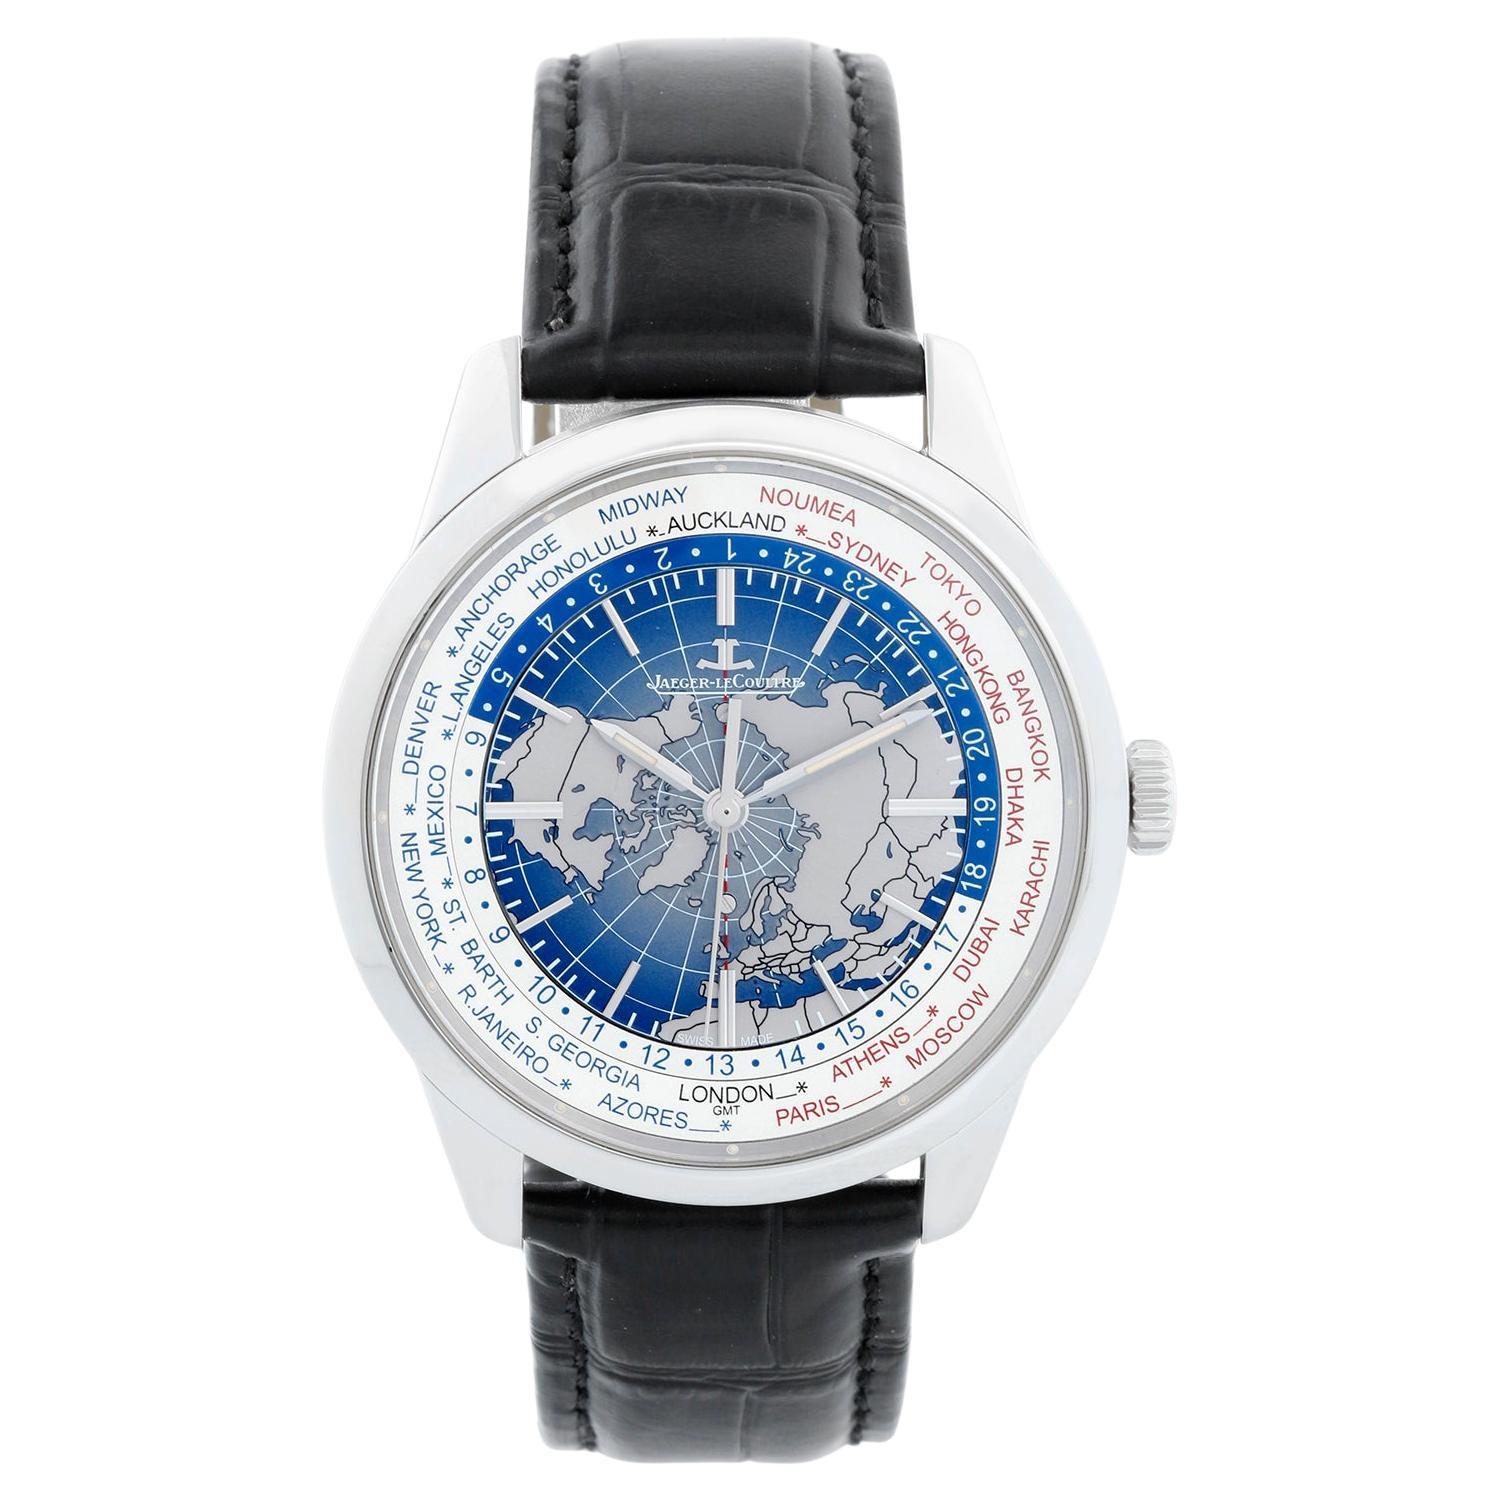 Jaeger LeCoultre Geophysic Universal Time Stainless Steel Men's Watch Ref Q81084 For Sale